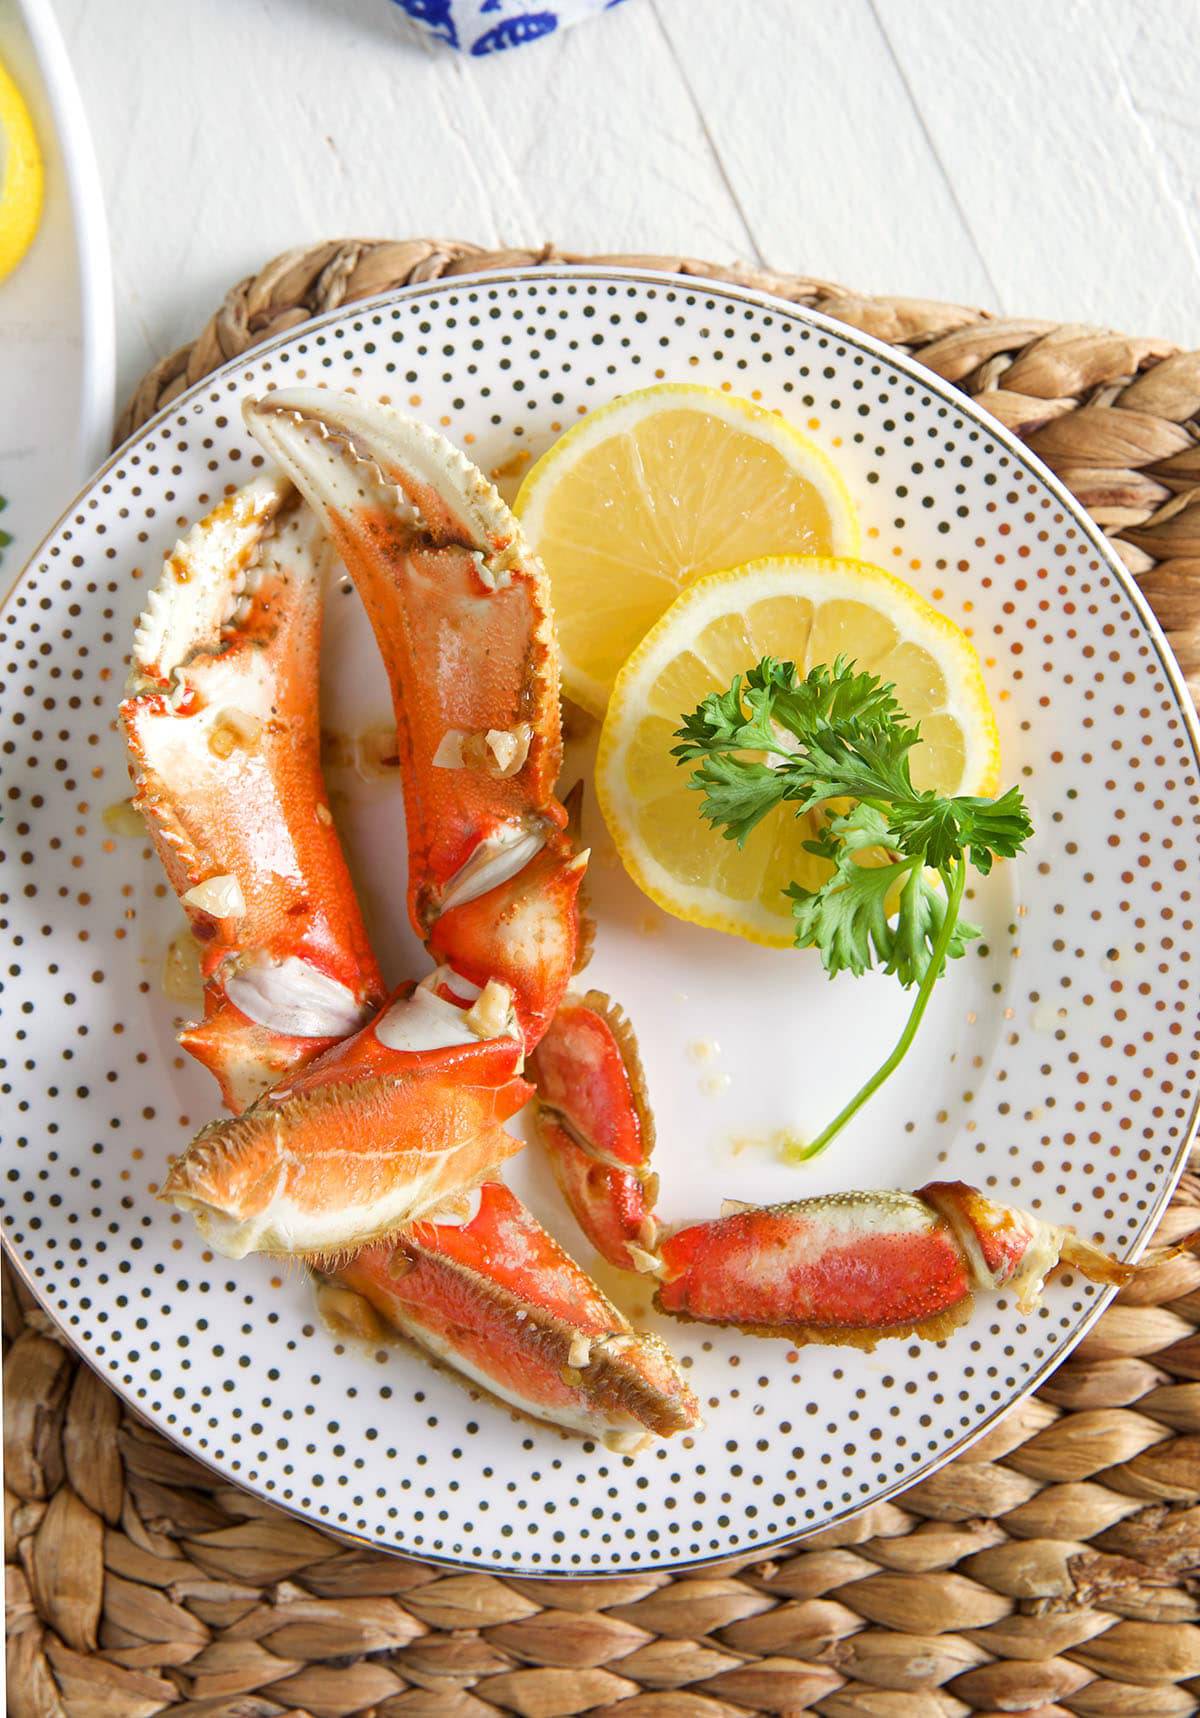 Two crab legs have been placed on a plate with lemon slices.